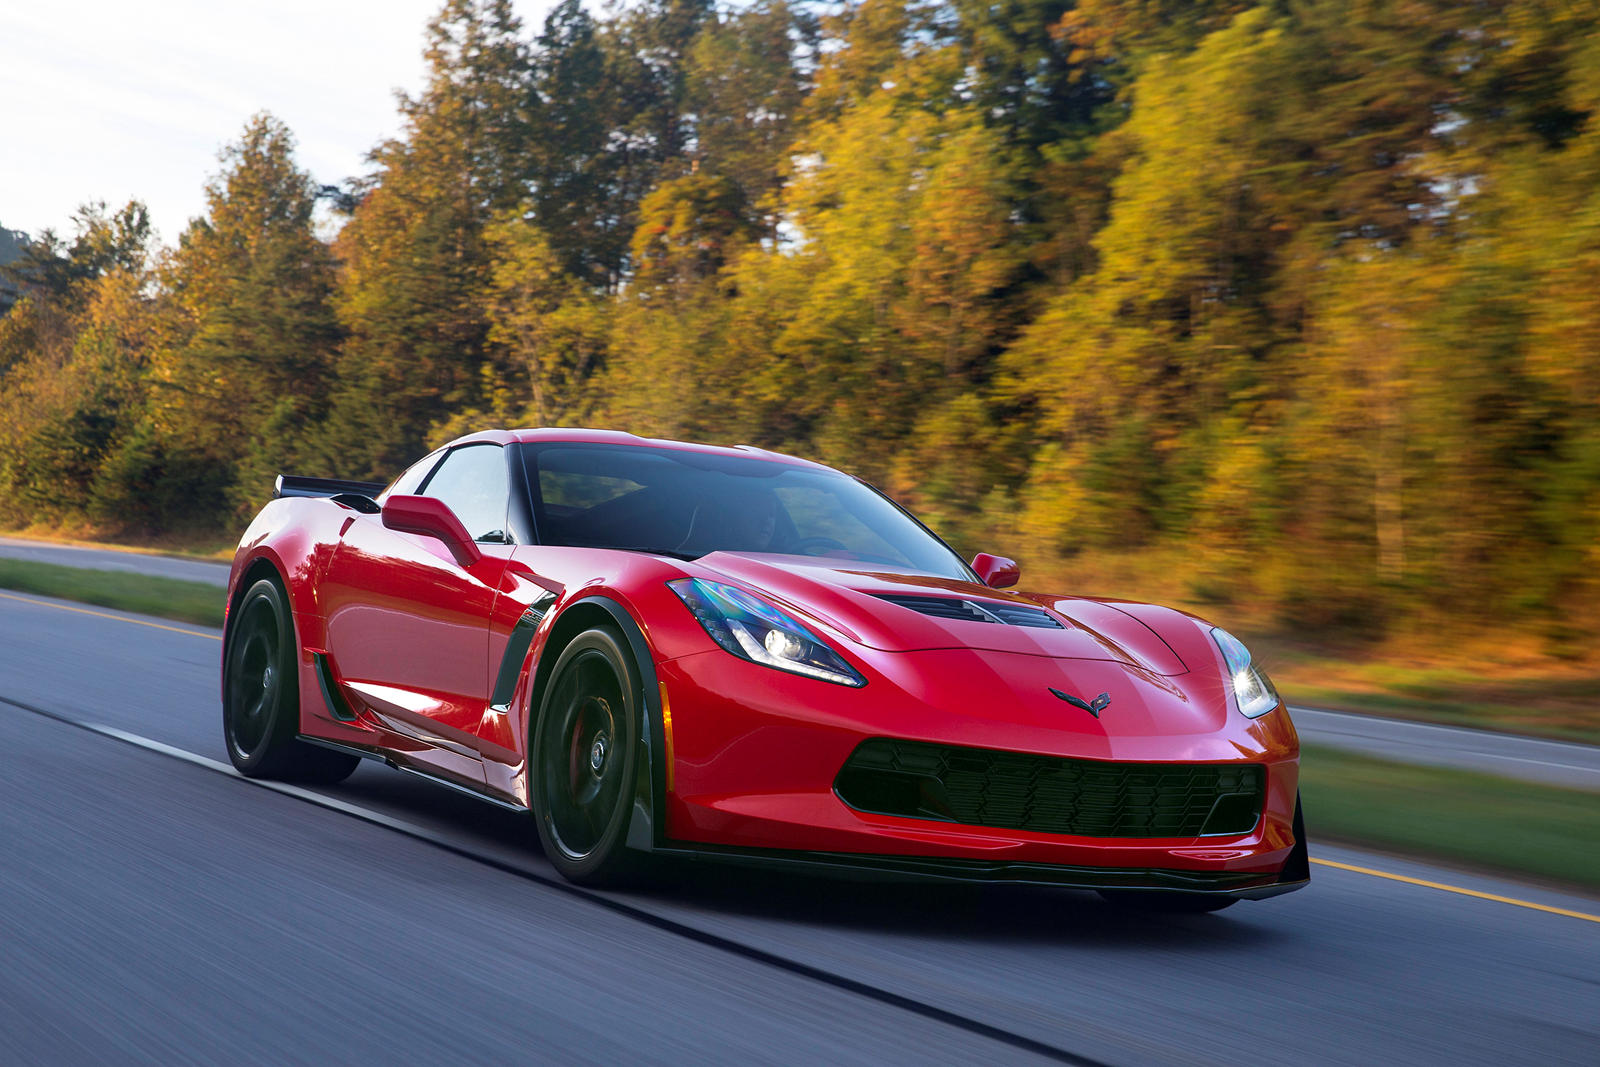 2018 Chevrolet Corvette Stingray Coupe Review, Trims, Specs and Price